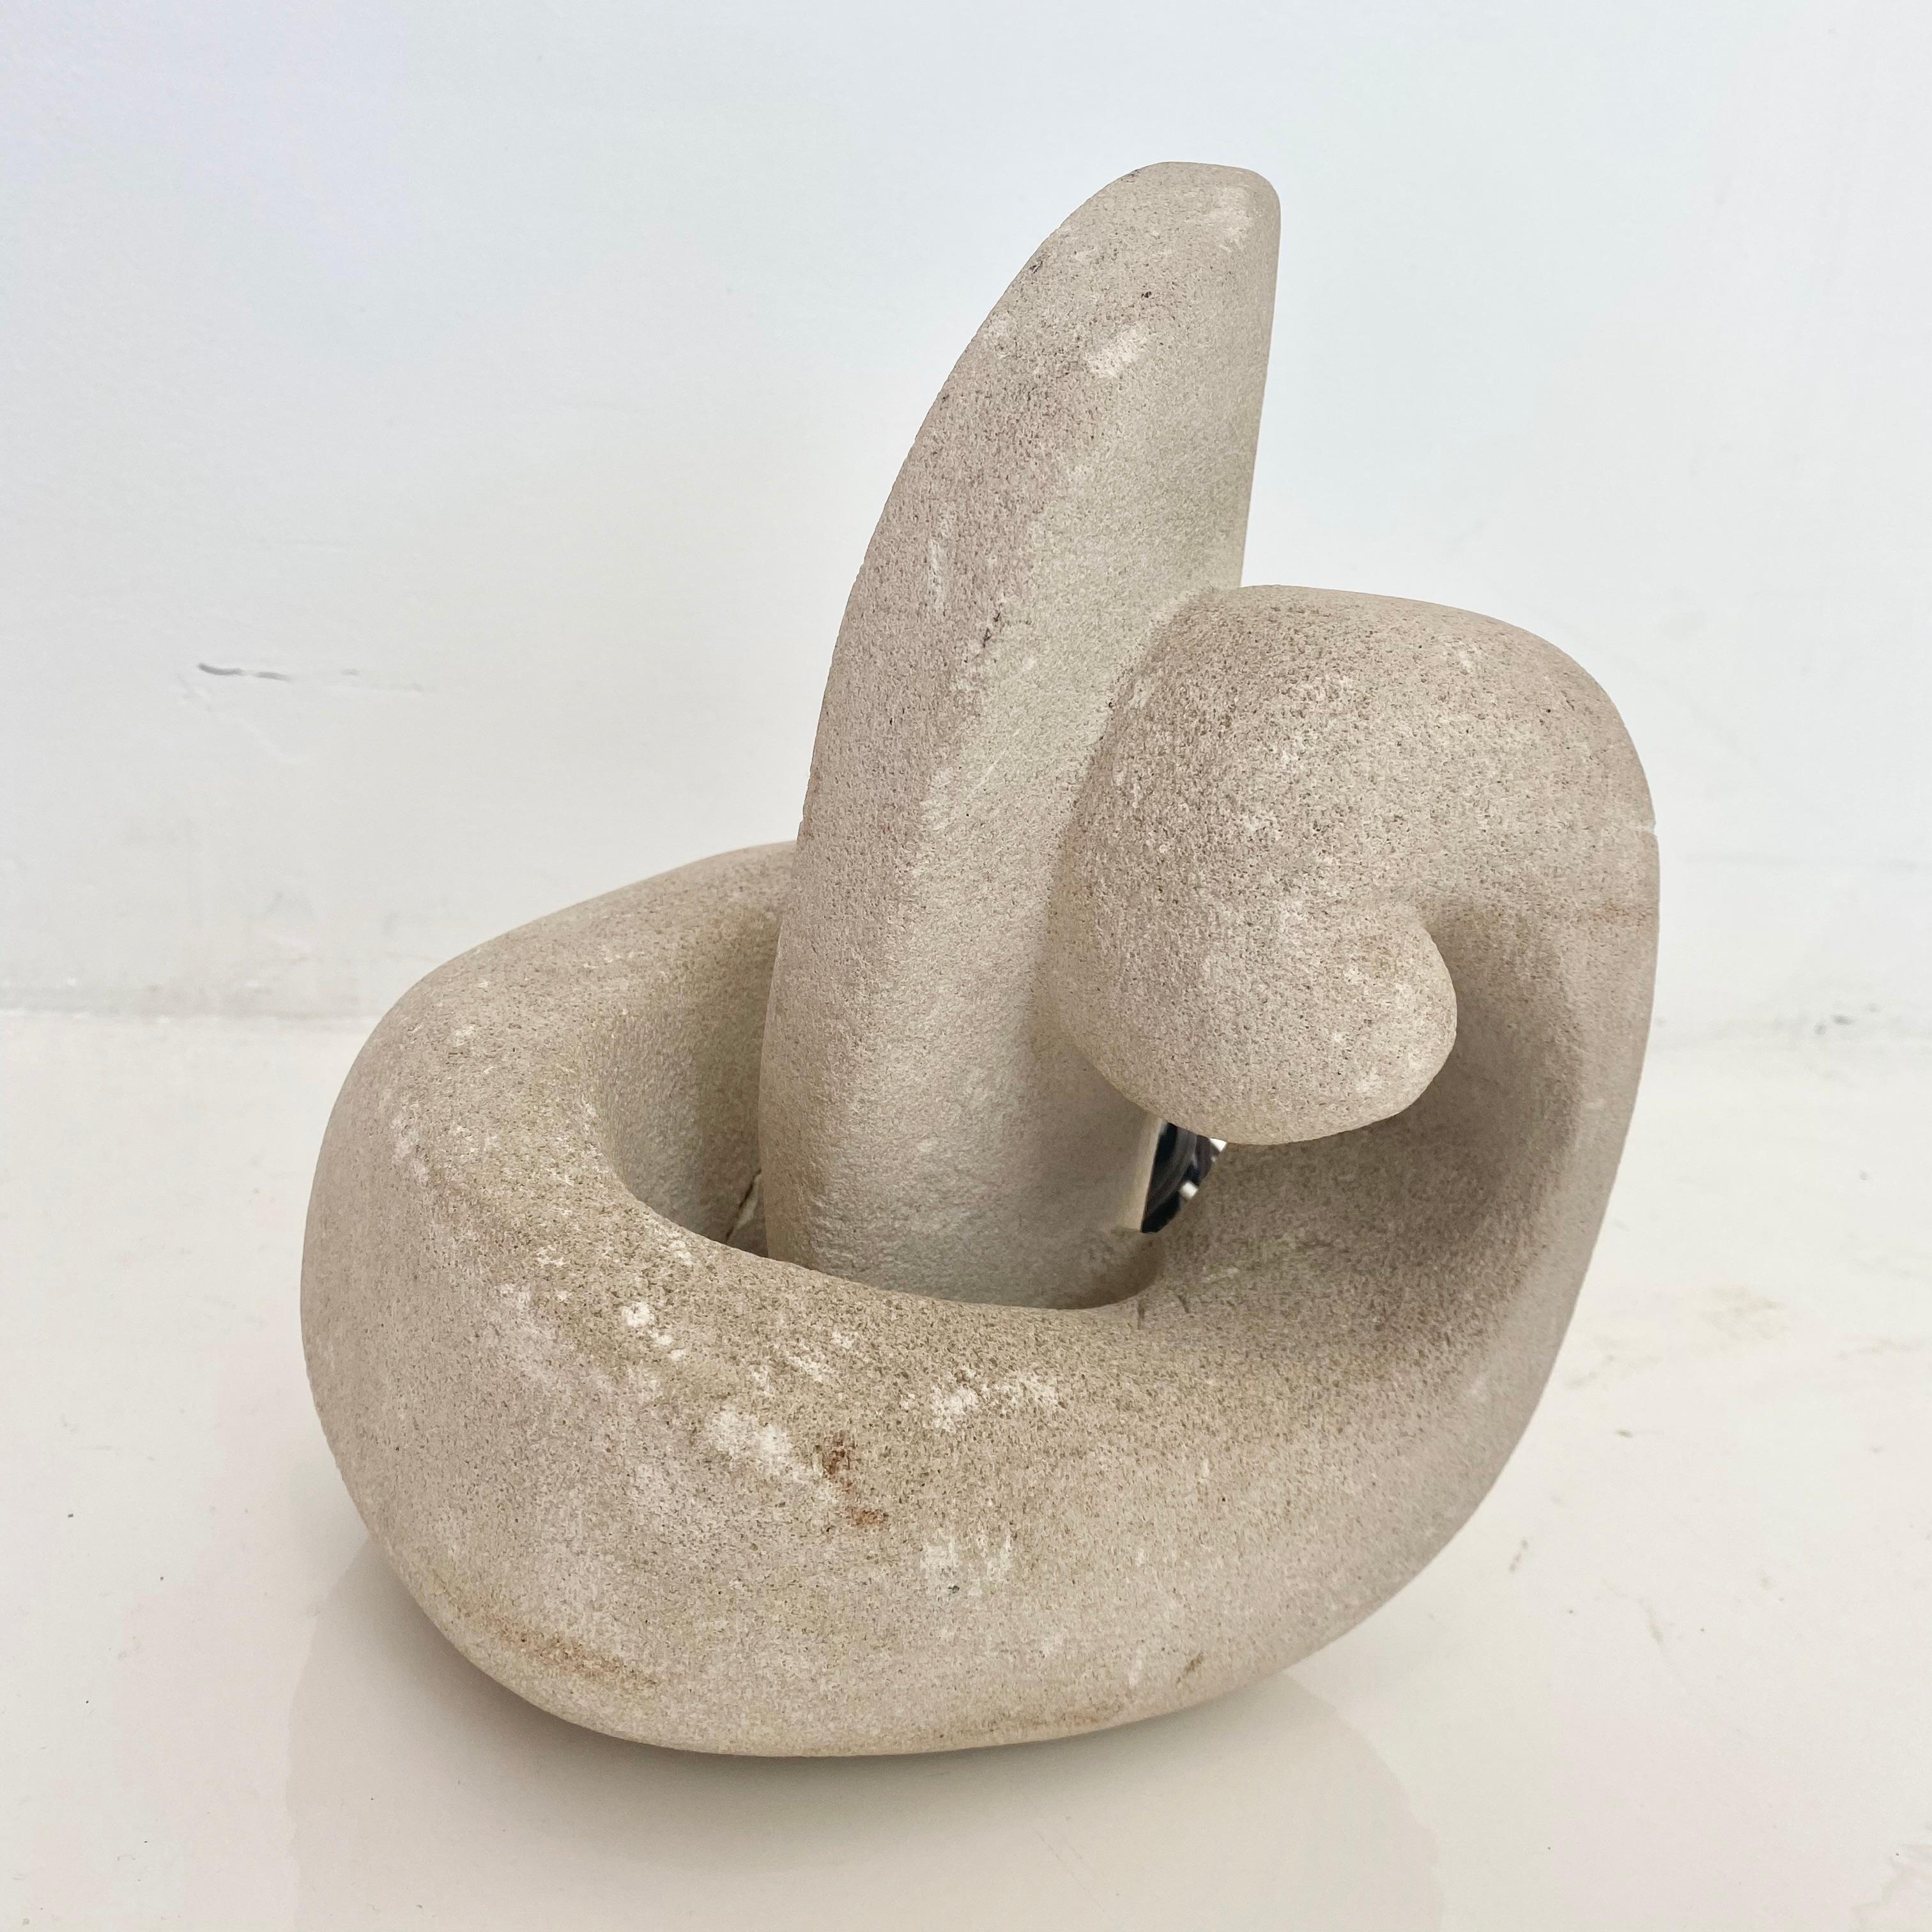 Beautiful carved stone lamp in the shape of a Nautilus. Made in France in the 1970s by French sculptor Albert Tormos. Unique abstract form. Looks great on and off. Hand switch on the cord. Great piece of usable art. Great condition.